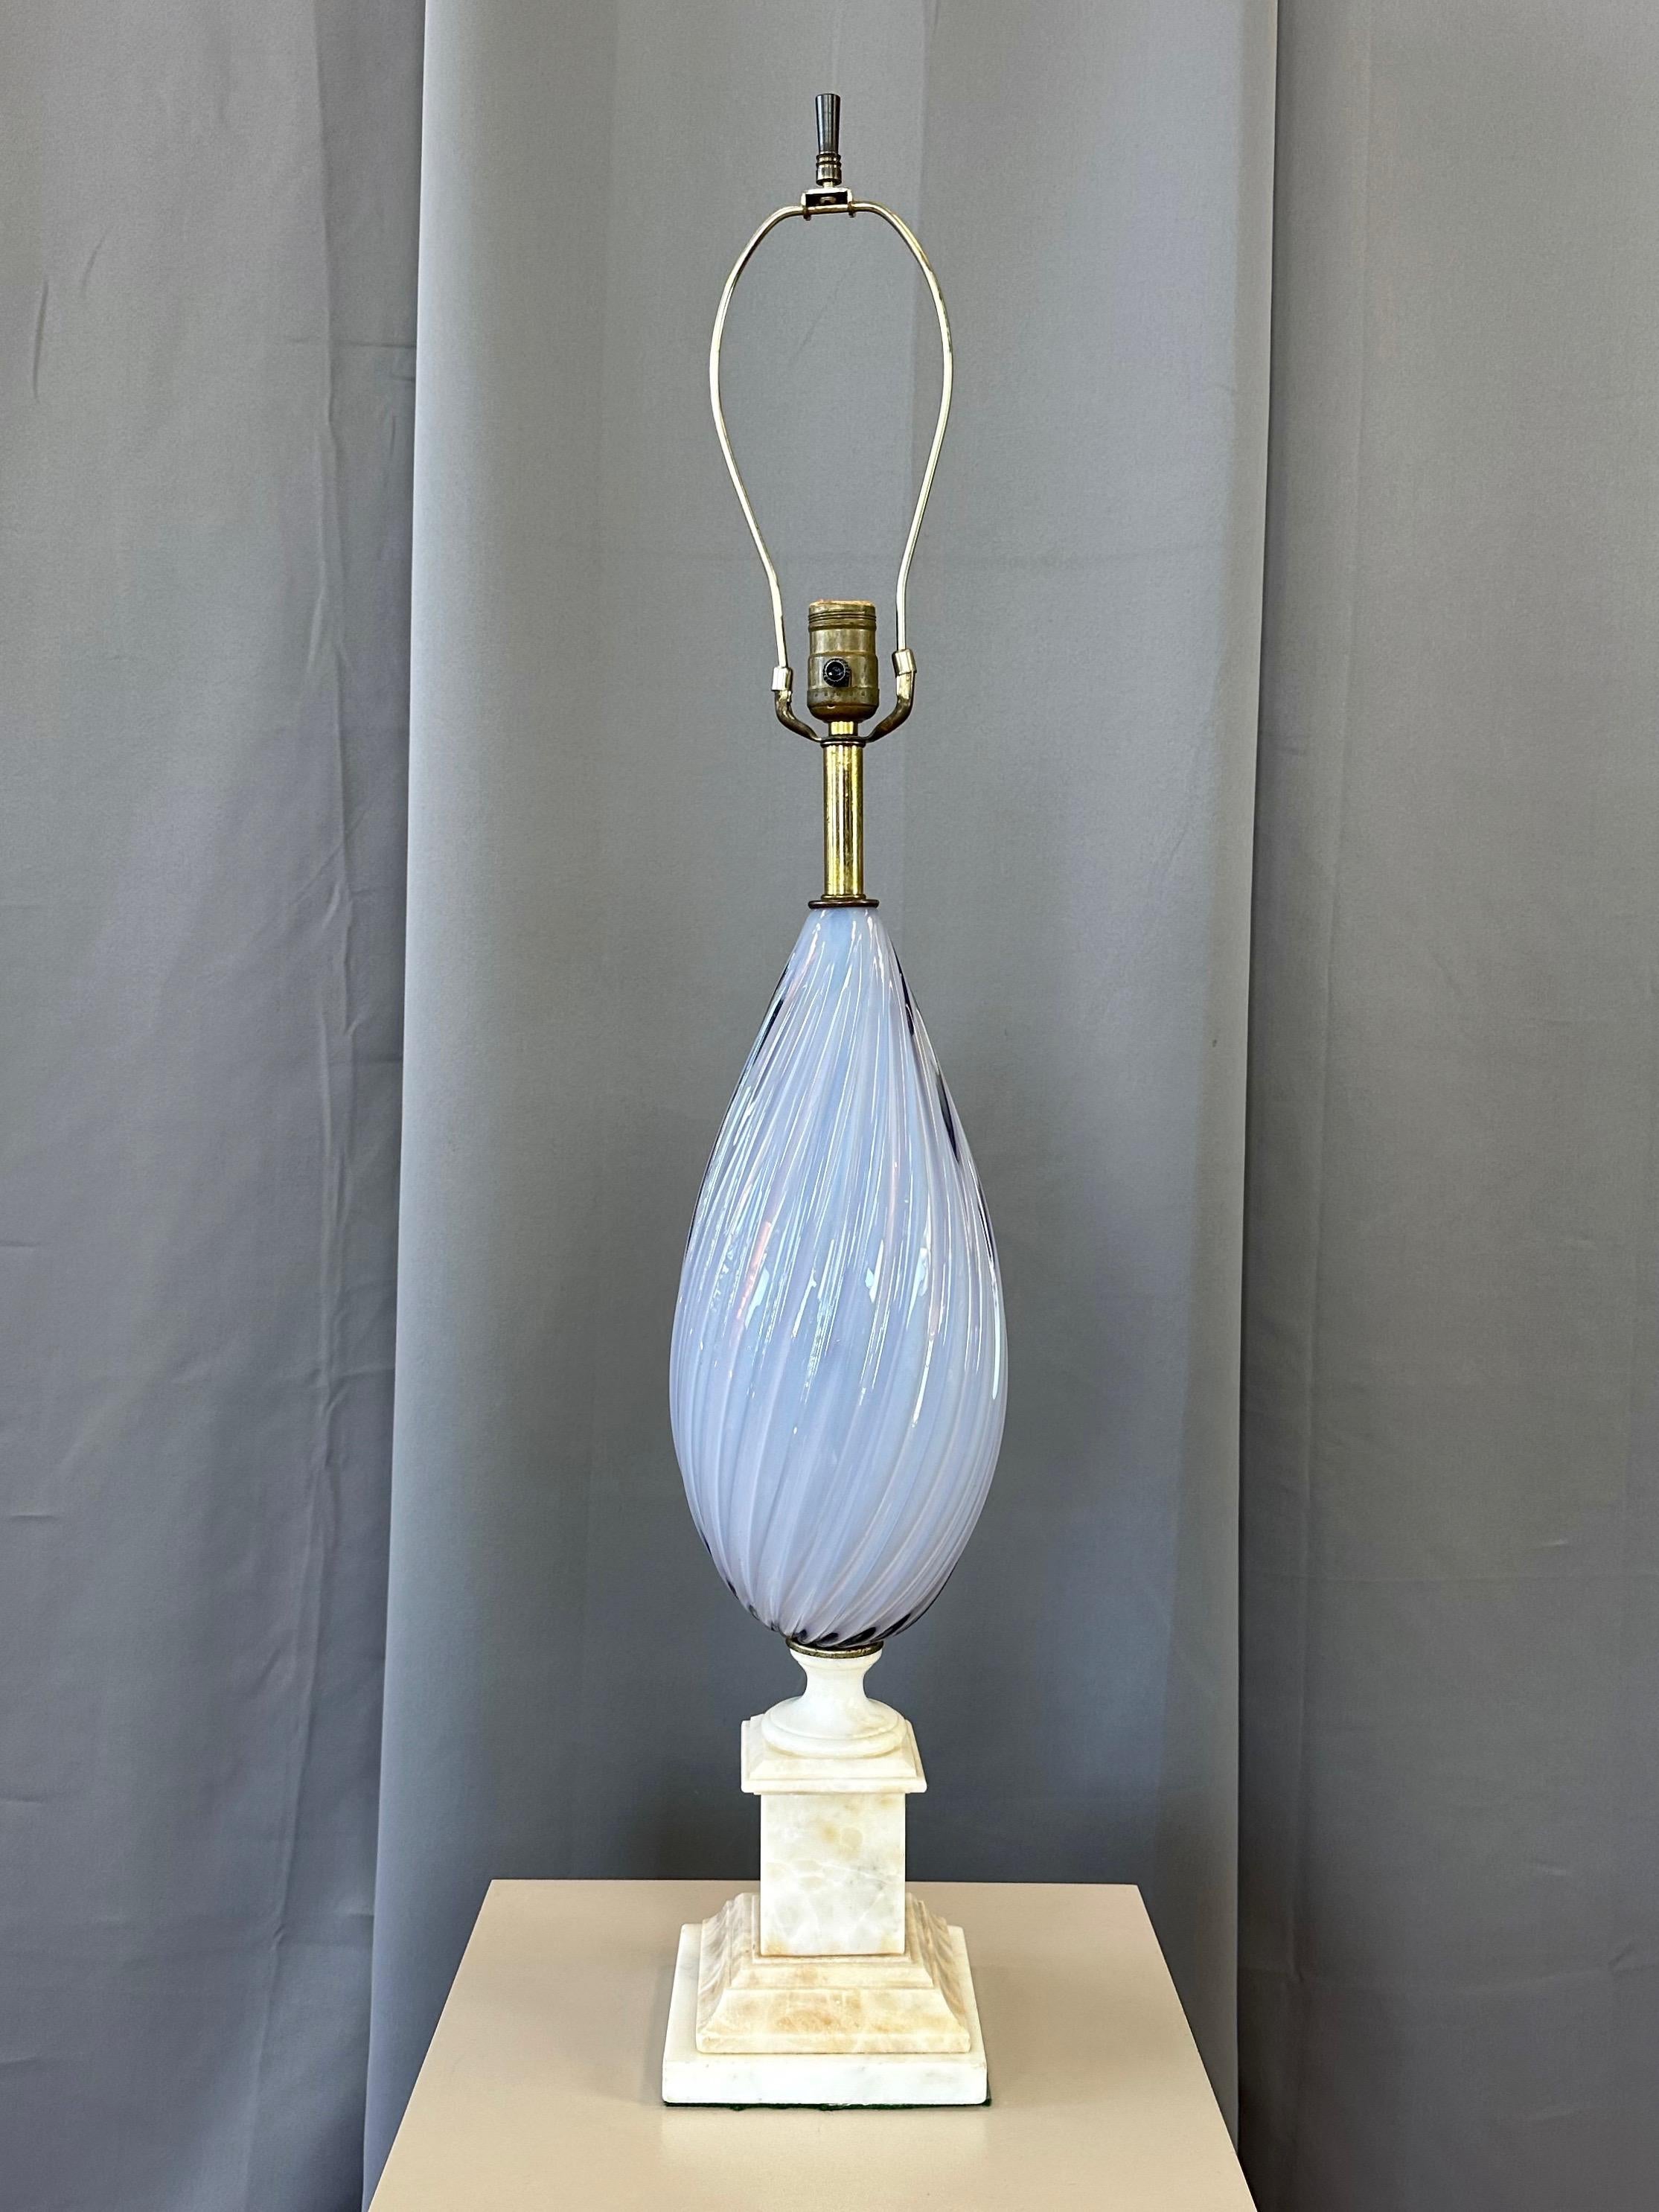 A gorgeous circa 1950 Italian periwinkle sommerso Murano glass table lamp on alabaster base.

Elegant hand-blown glass twisted tear drop-shaped body in an absolutely beautiful shade of pale periwinkle encased within a thin clear layer. A skillfully